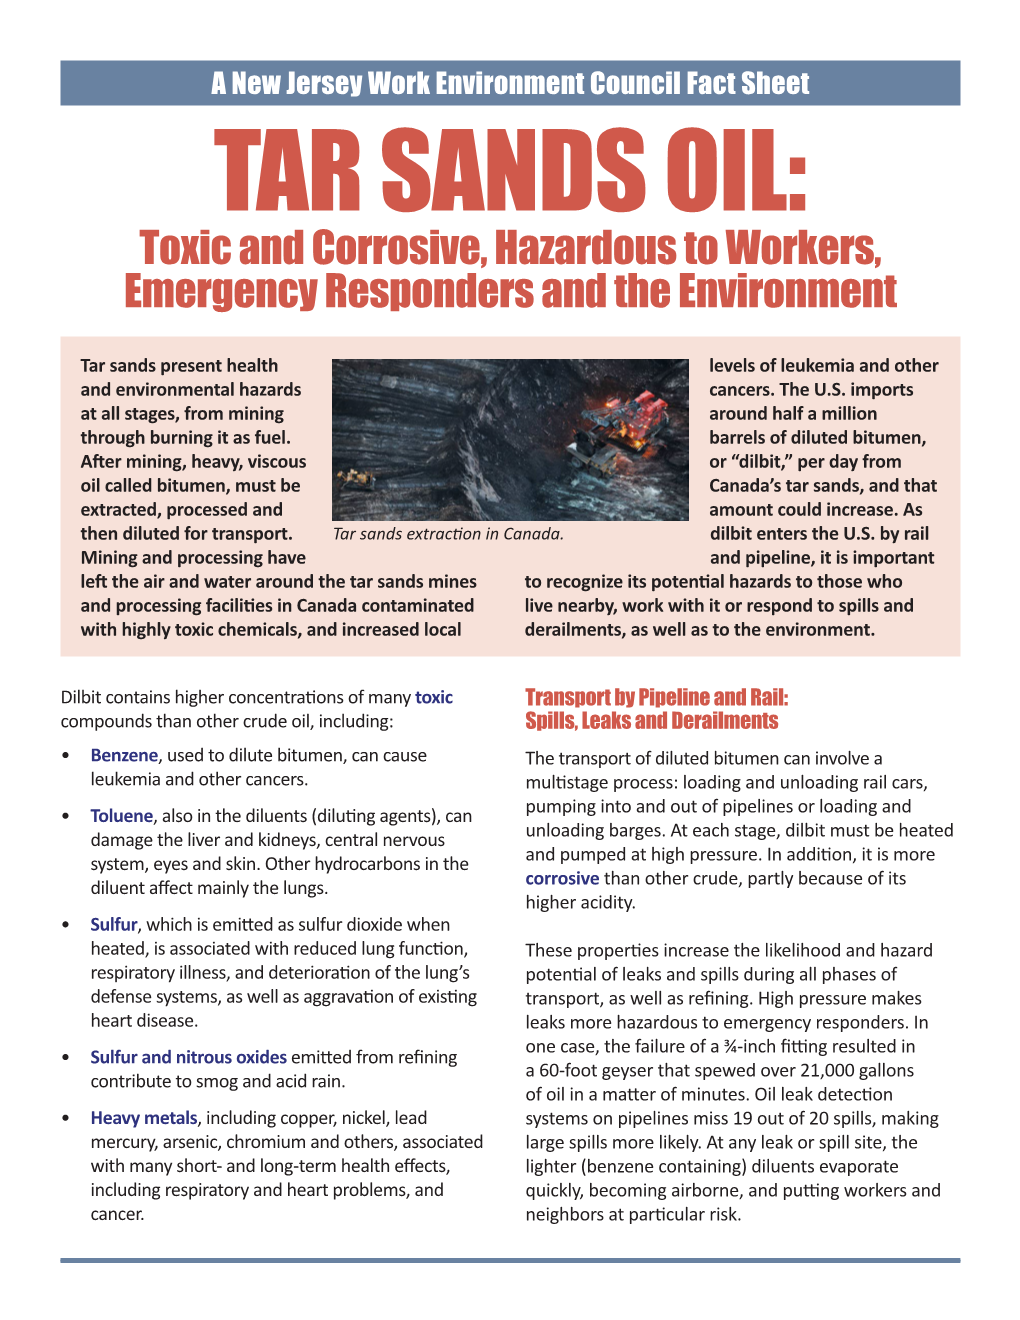 TAR SANDS OIL: Toxic and Corrosive, Hazardous to Workers, Emergency Responders and the Environment